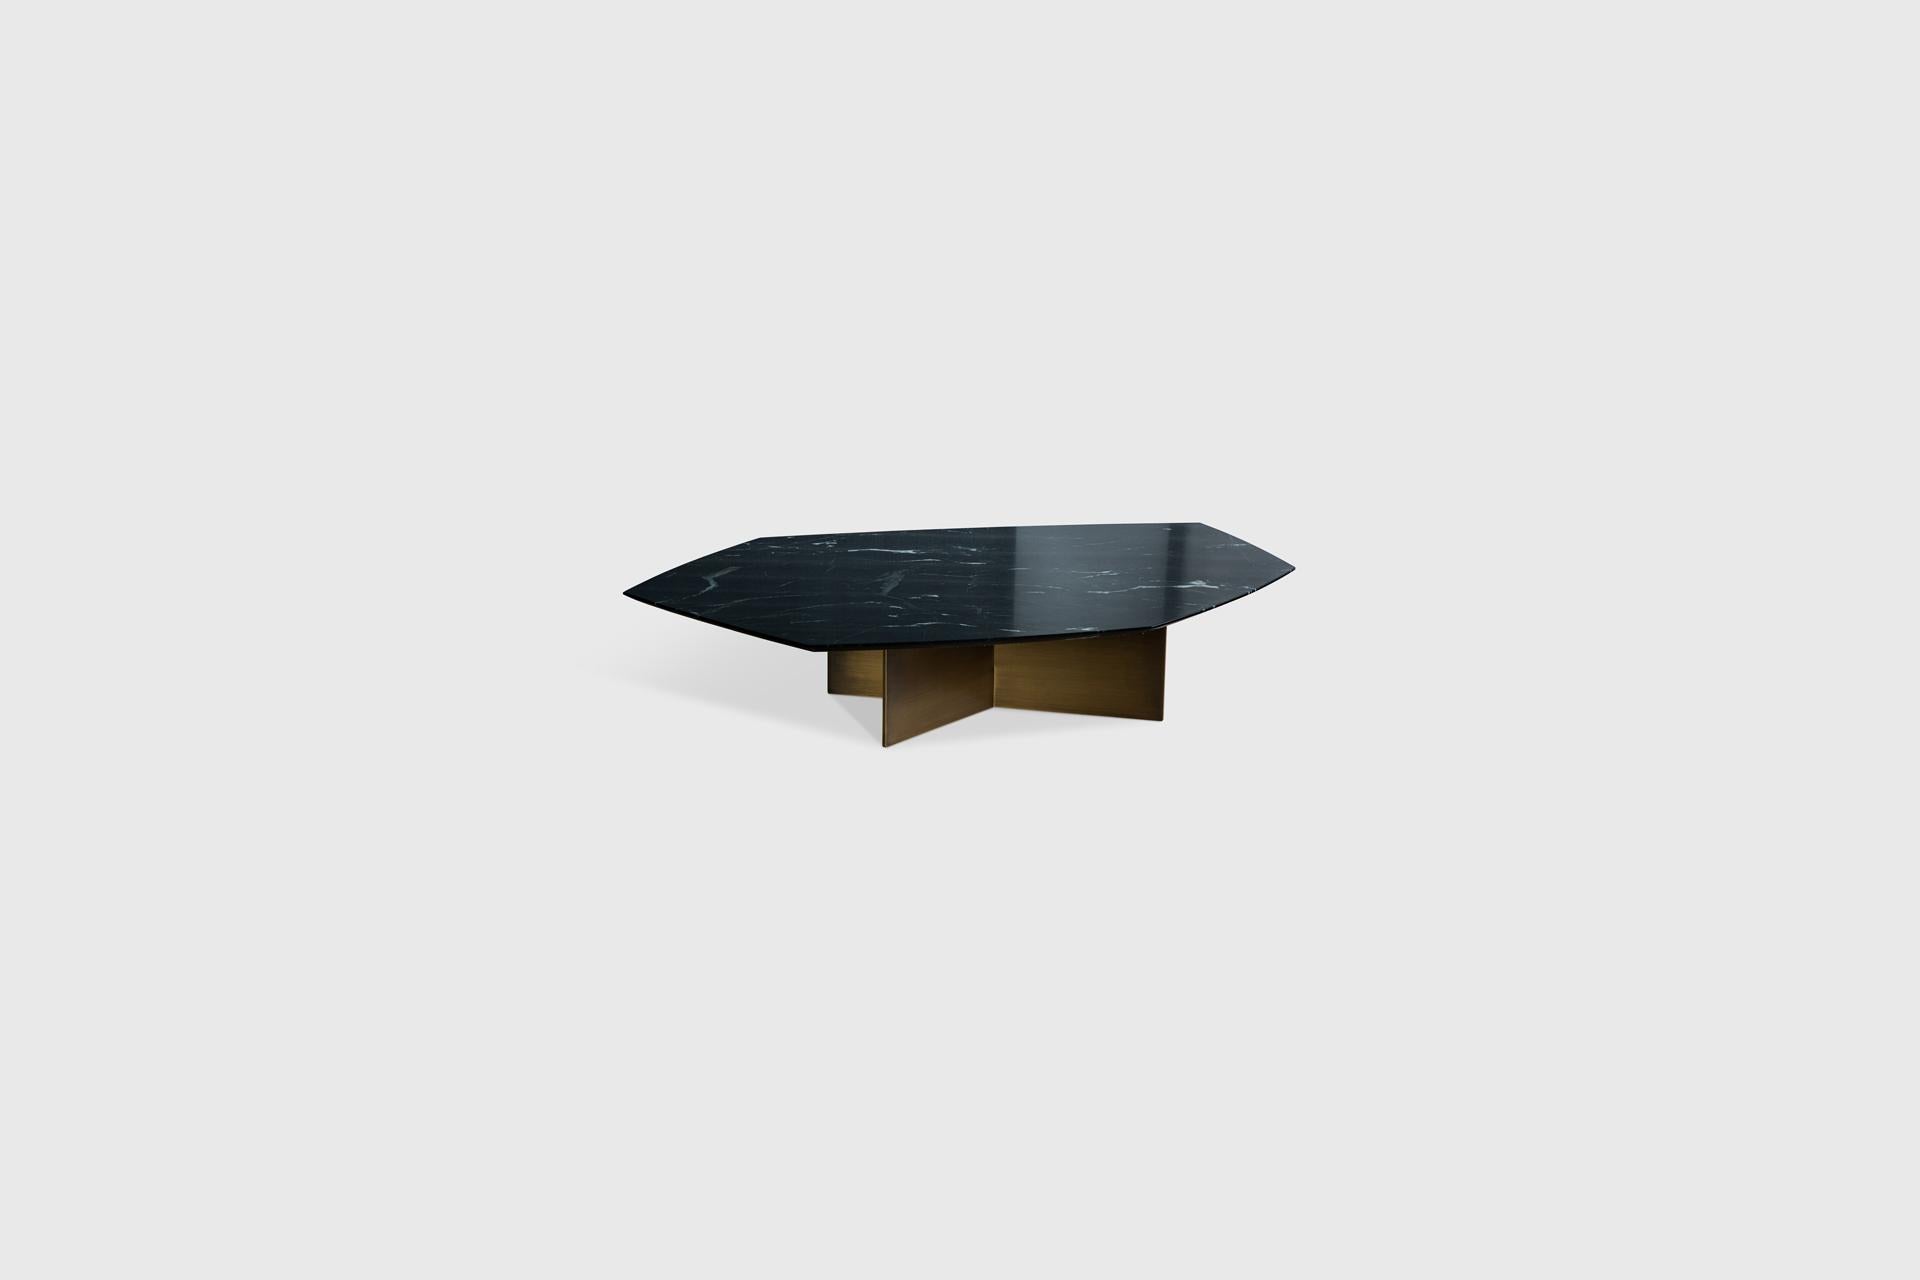 Geometrik Negro Monterrey Stone and Brass Medium Coffee Table by Atra Design
Dimensions: D 120 x W 160 x H 32 cm.
Materials: Negro Monterrey stone and brass.

Available in three sizes. Different marble options available: Verde Tikal, Negro